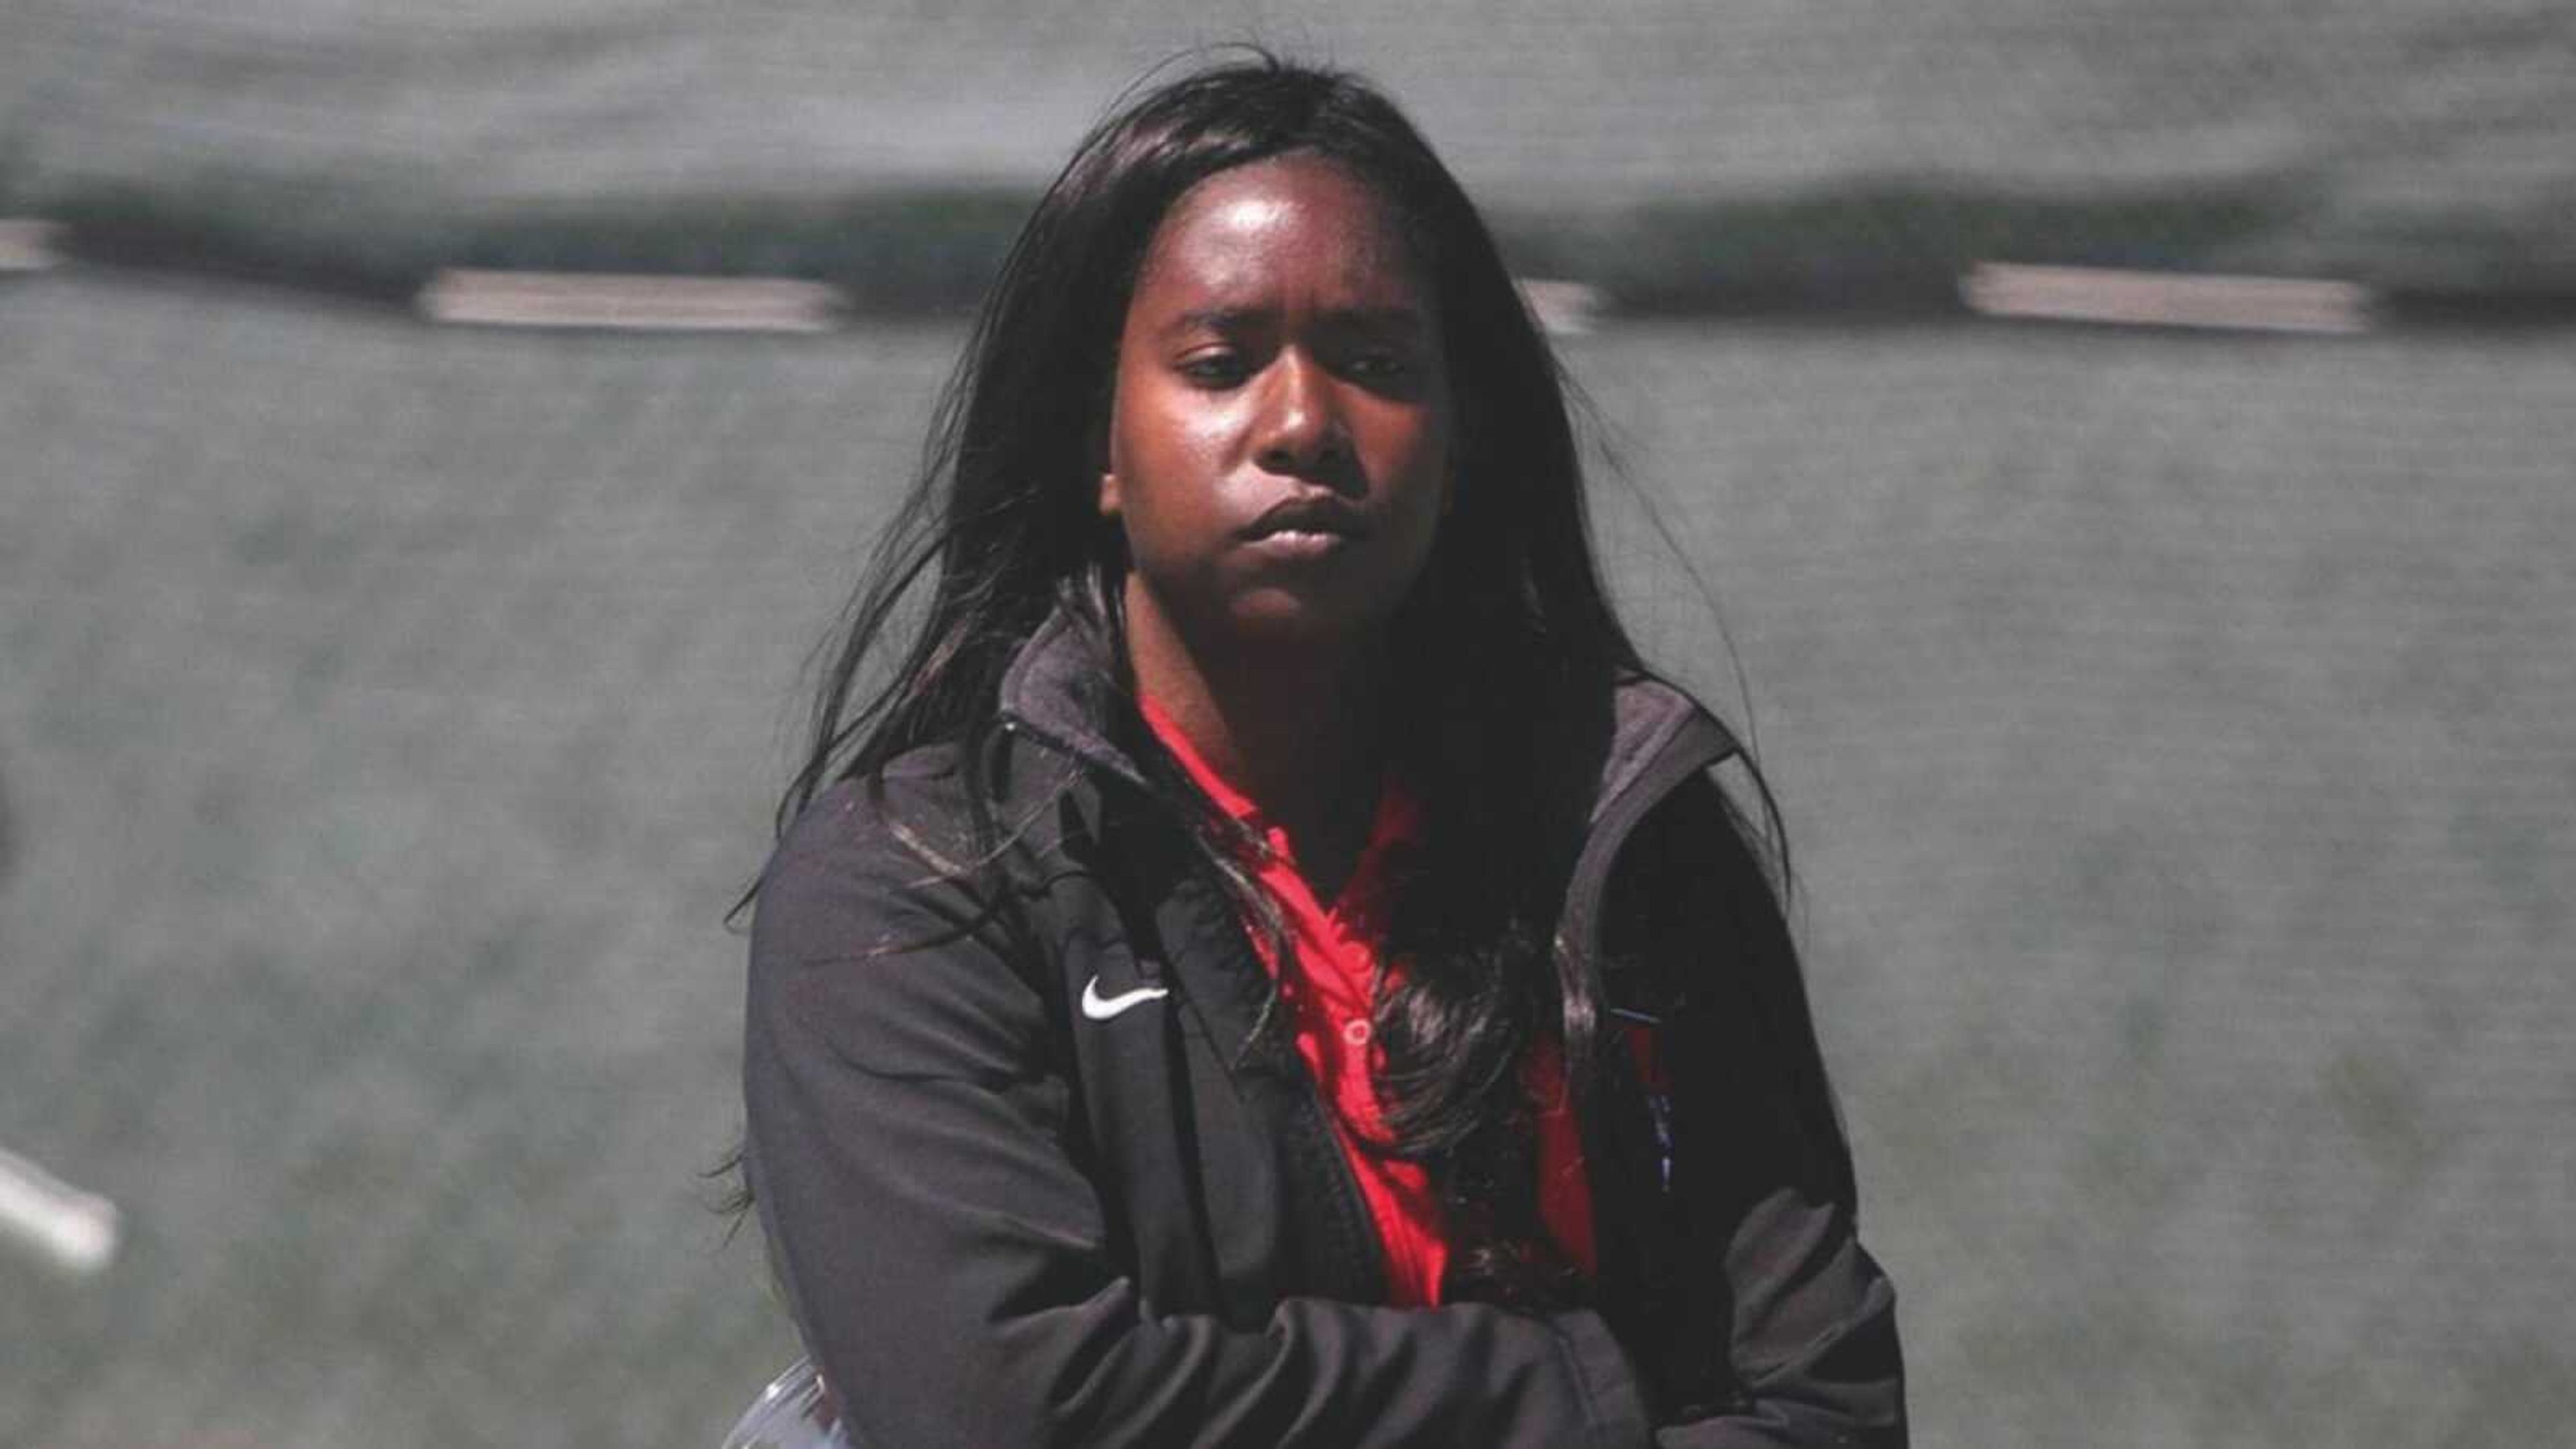 Leah Killen went 11-33 overall and 5-15 in Ohio Valley Conference play in her two seasons as the Southeast Missouri State women's tennis coach.